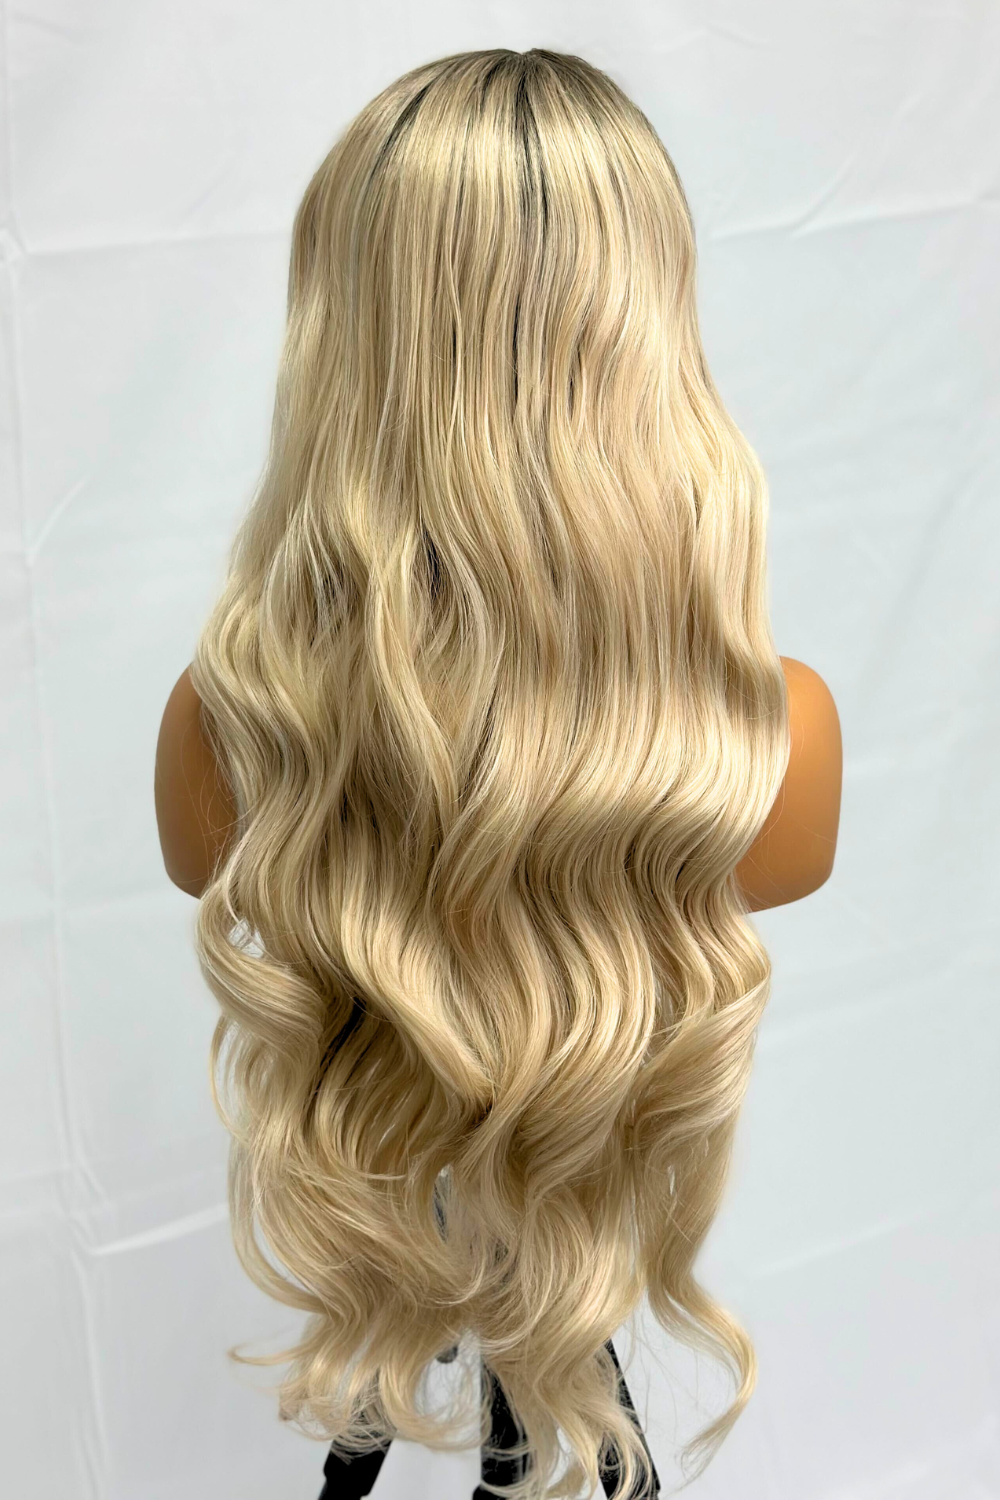 "Meteoric Melange" | Synthetic Lace Front Wig | Long Wavy Black to Blonde Ombre Wig